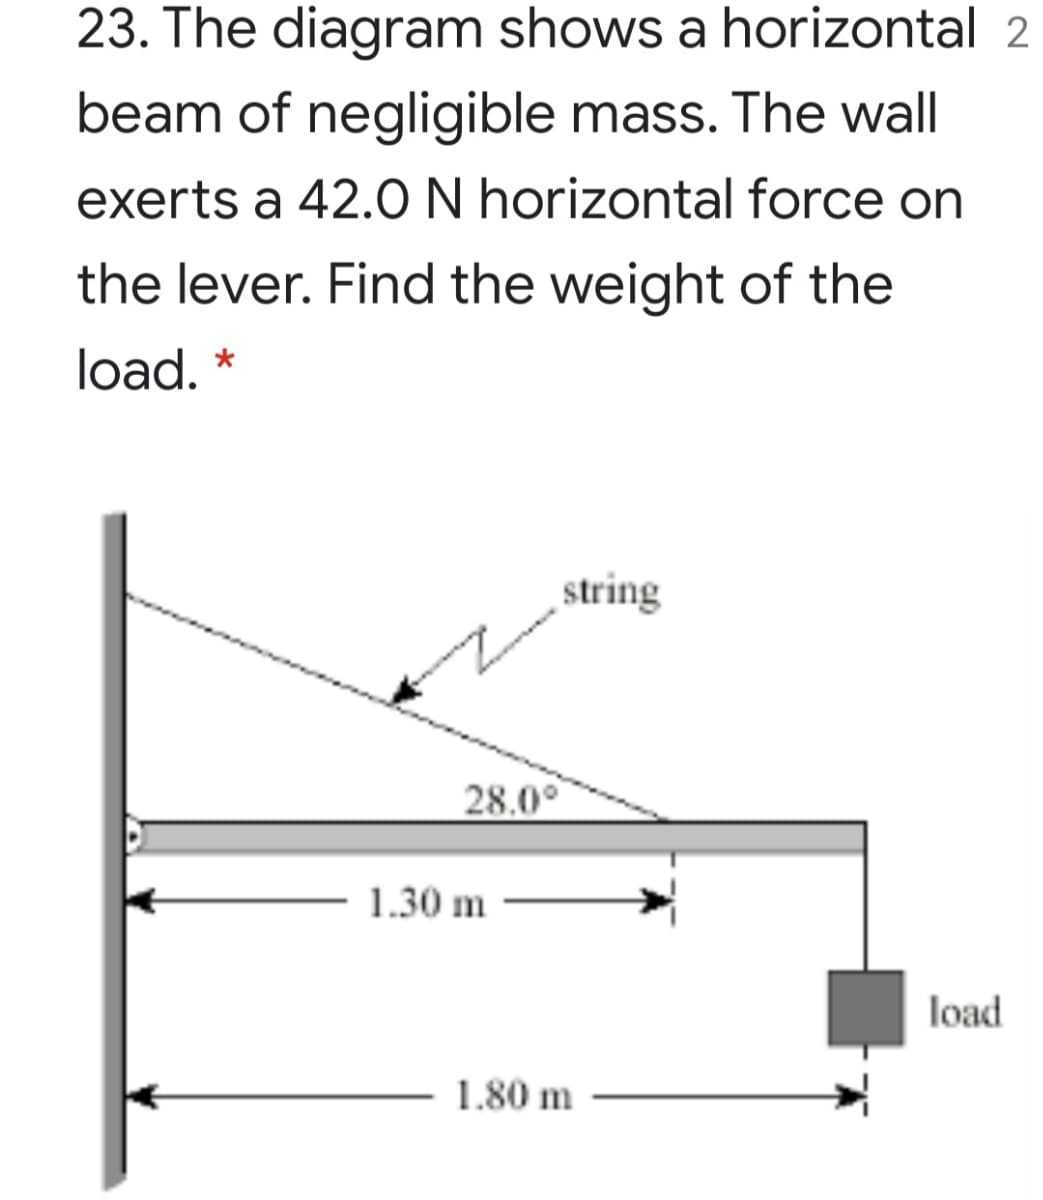 23. The diagram shows a horizontal 2
beam of negligible mass. The wall
exerts a 42.O N horizontal force on
the lever. Find the weight of the
load. *
string
28.0°
1.30 m
load
1.80 m
